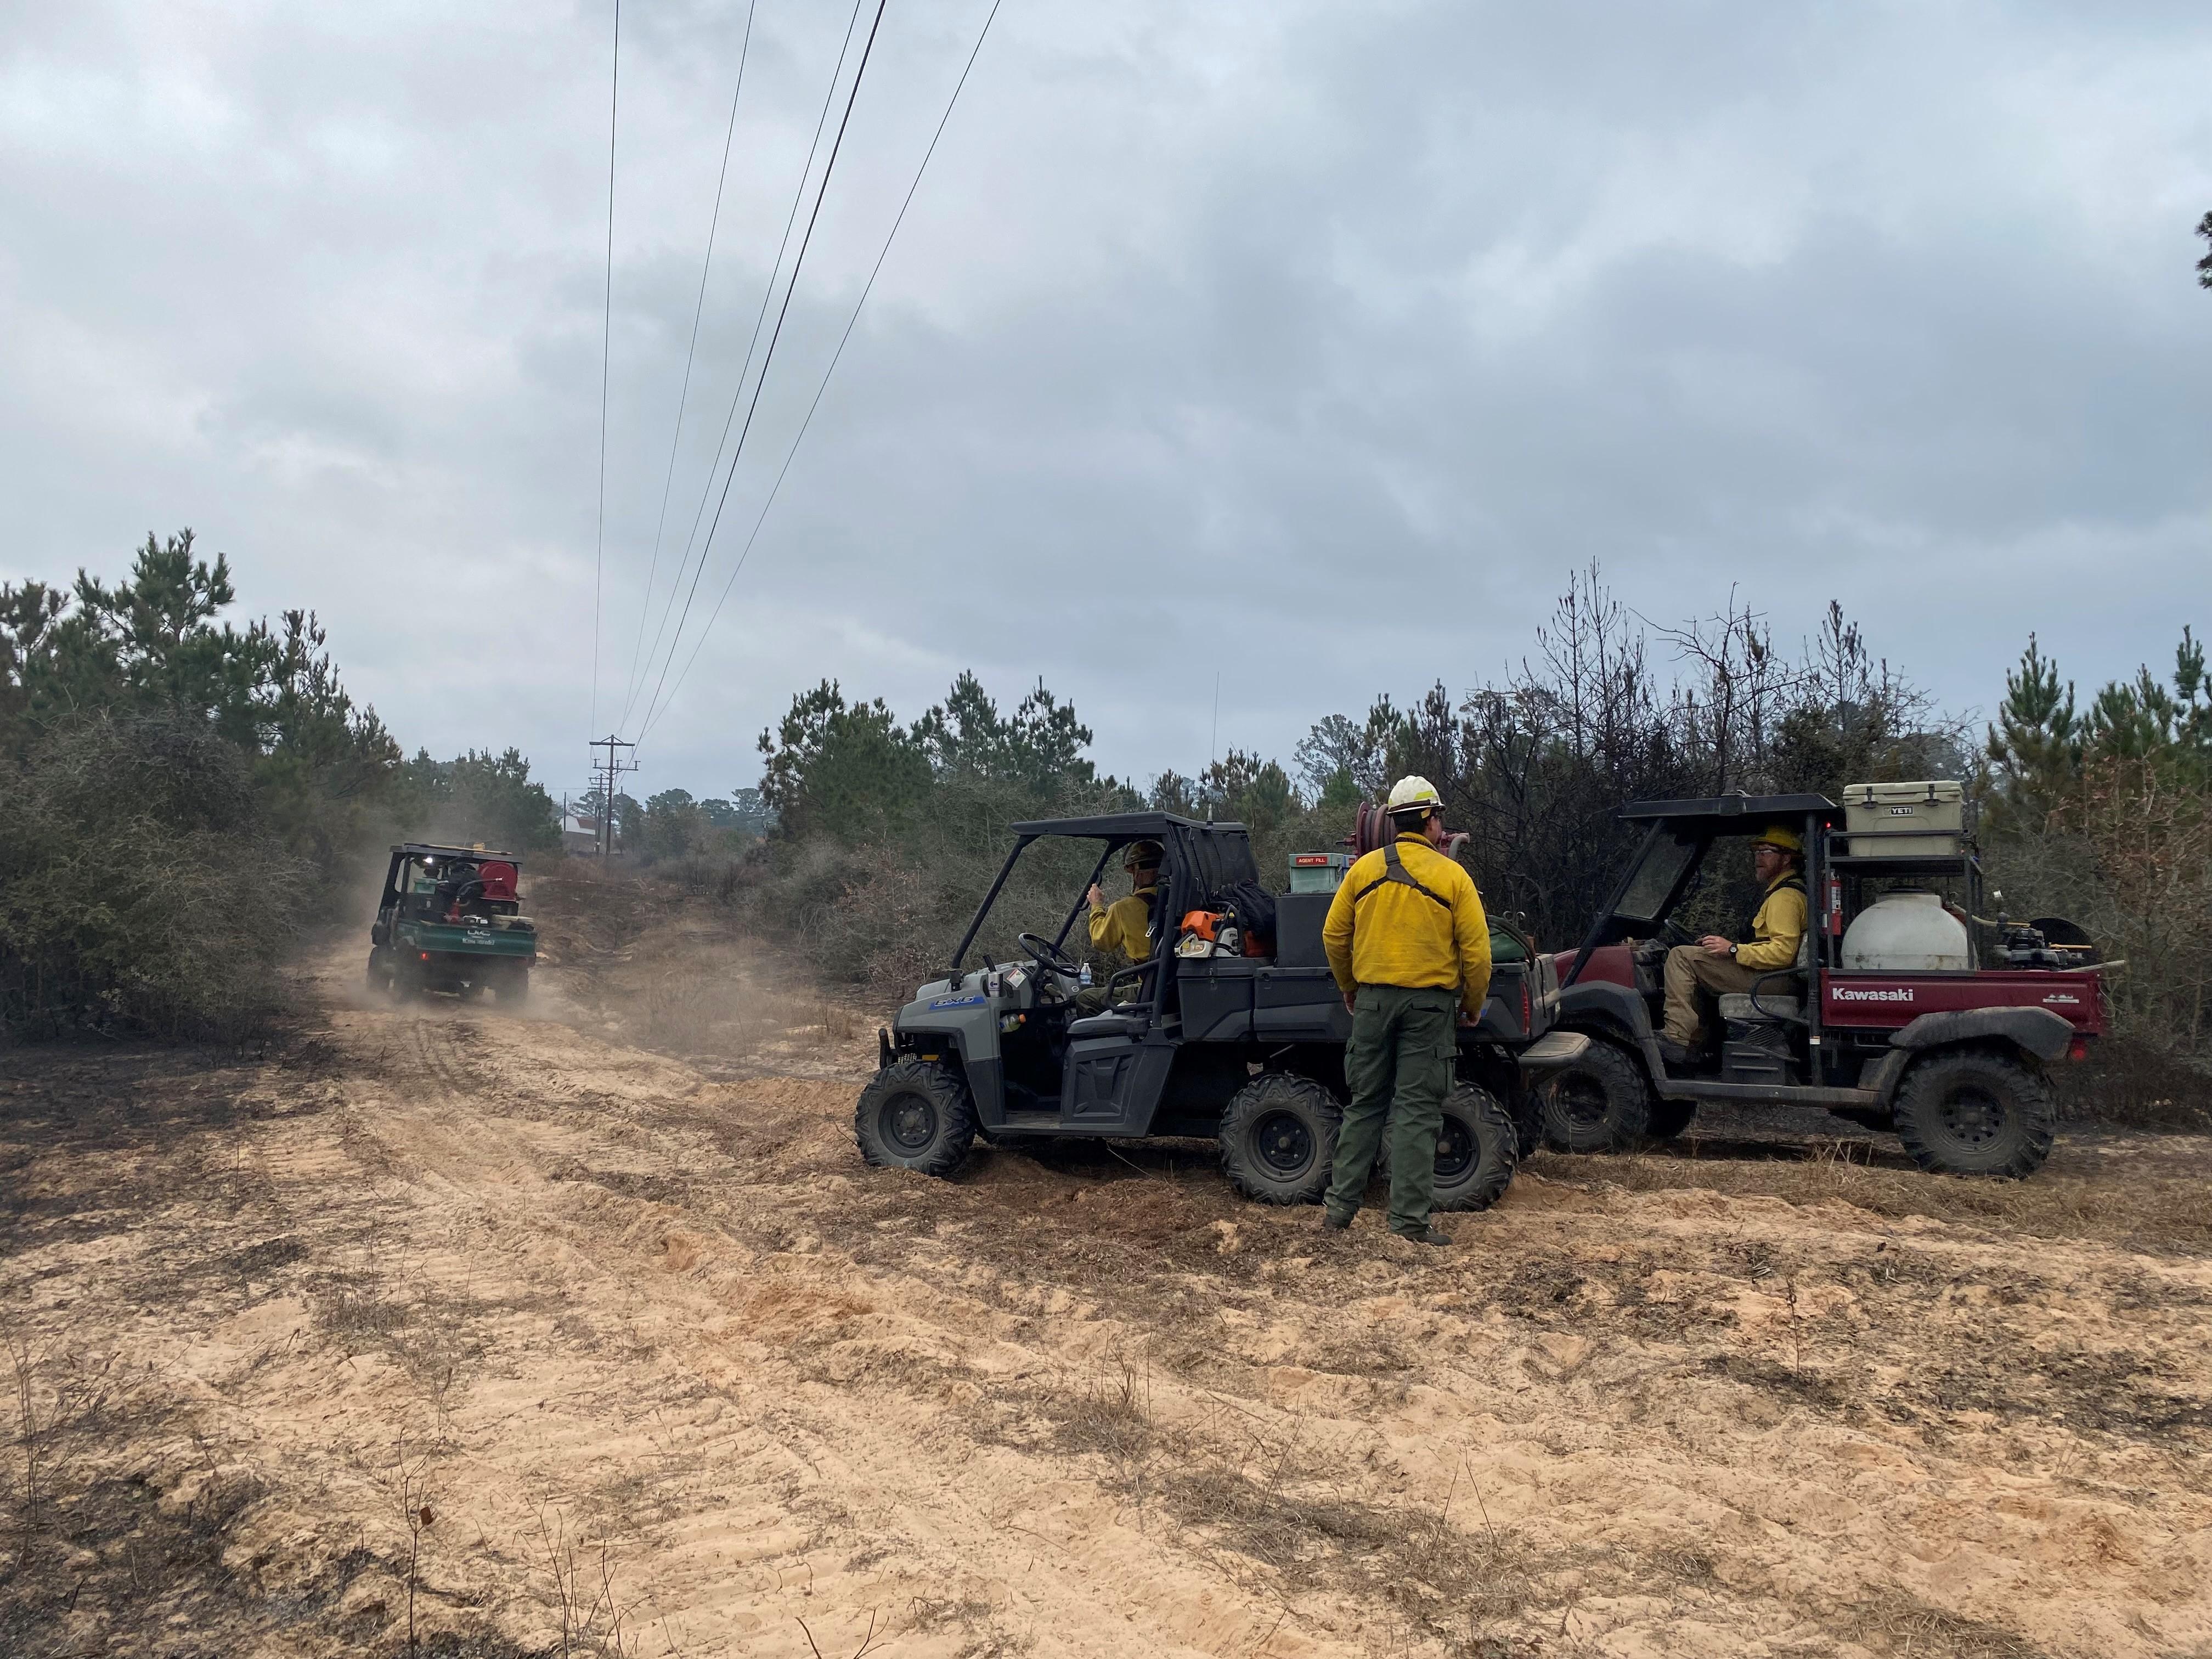 View of fireline personnel patrolling a containment line using UTVS alone a powerline